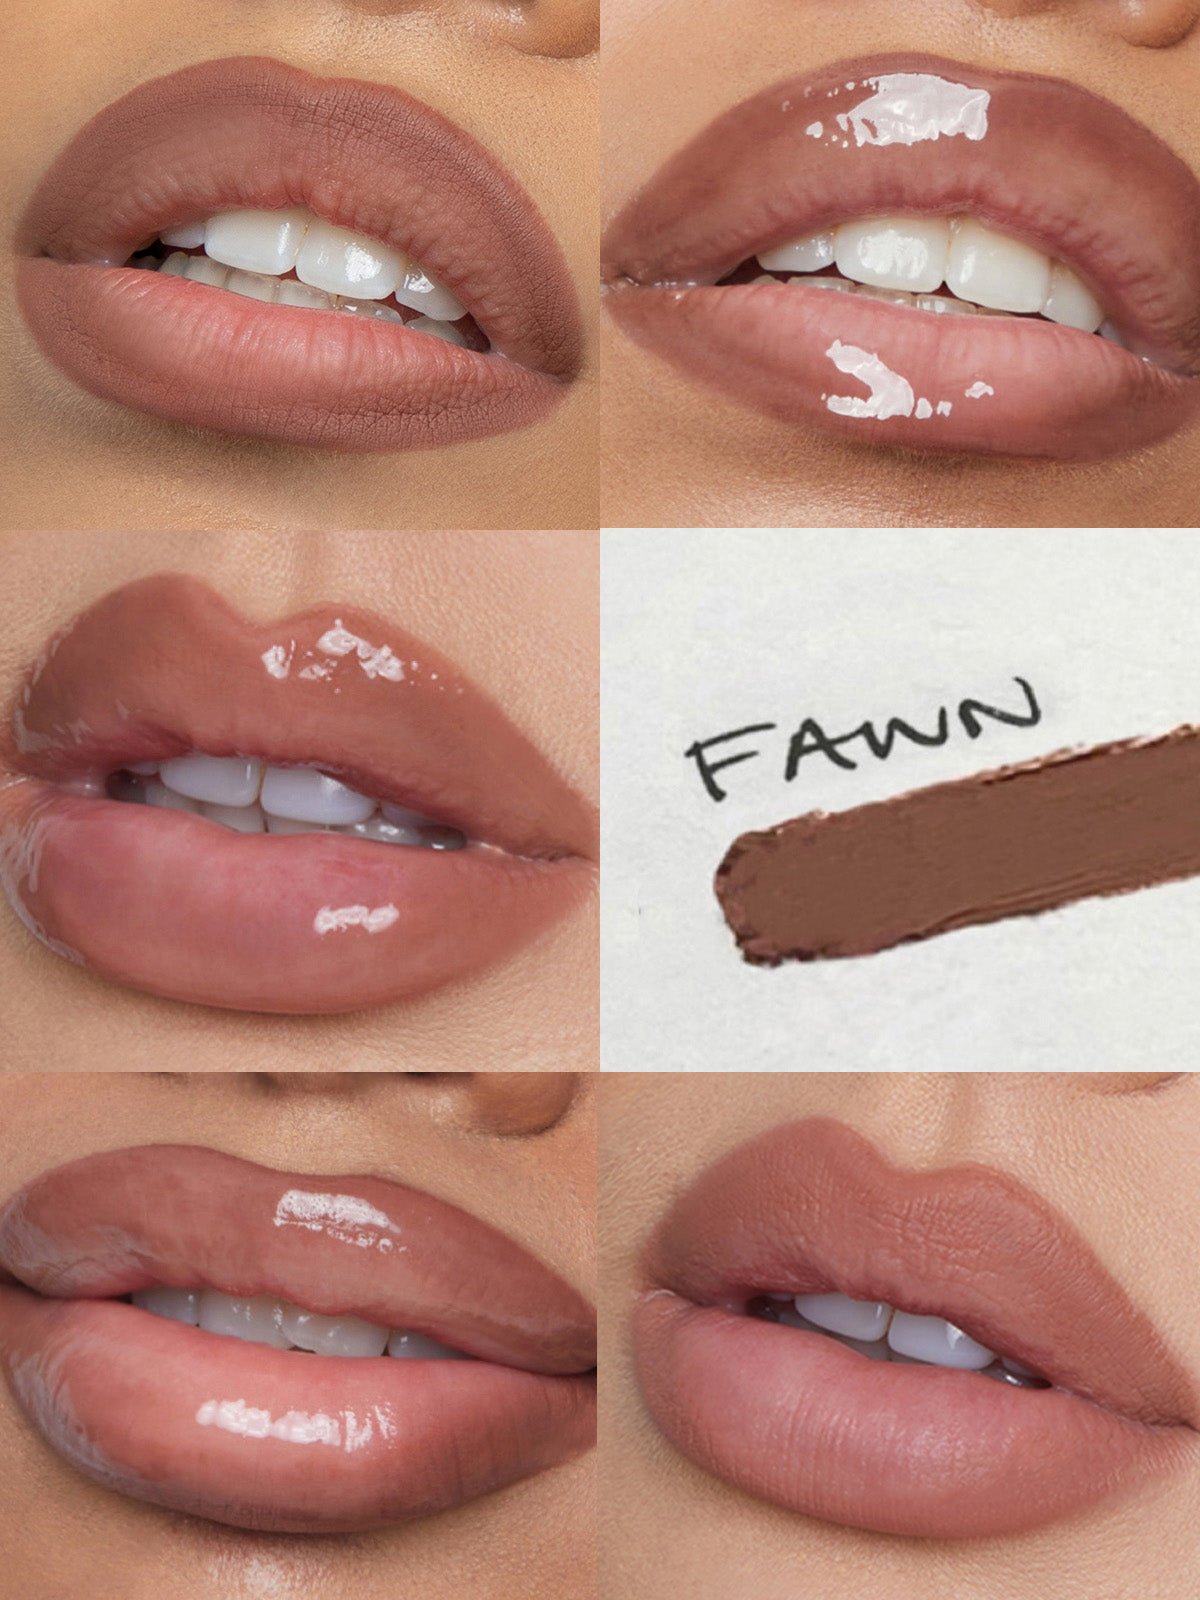 SHADE SWATCH OF REFY LIP SCULPT IN FAWN 